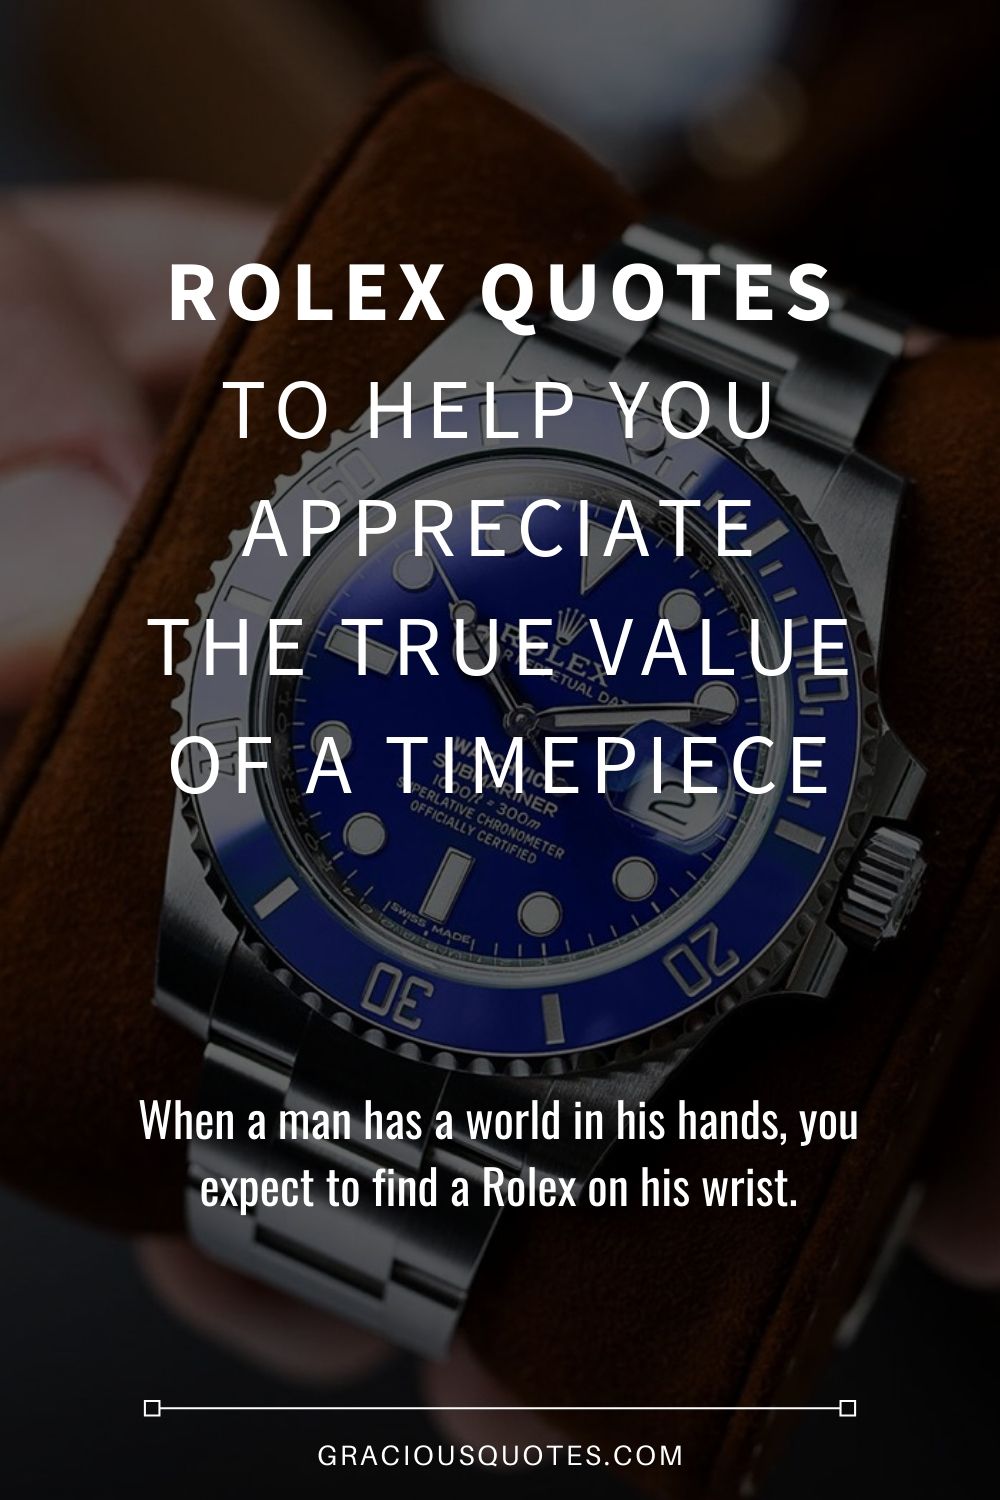 Rolex-Quotes-To-Help-You-Appreciate-the-True-Value-of-a-Timepiece-Gracious-Quotes